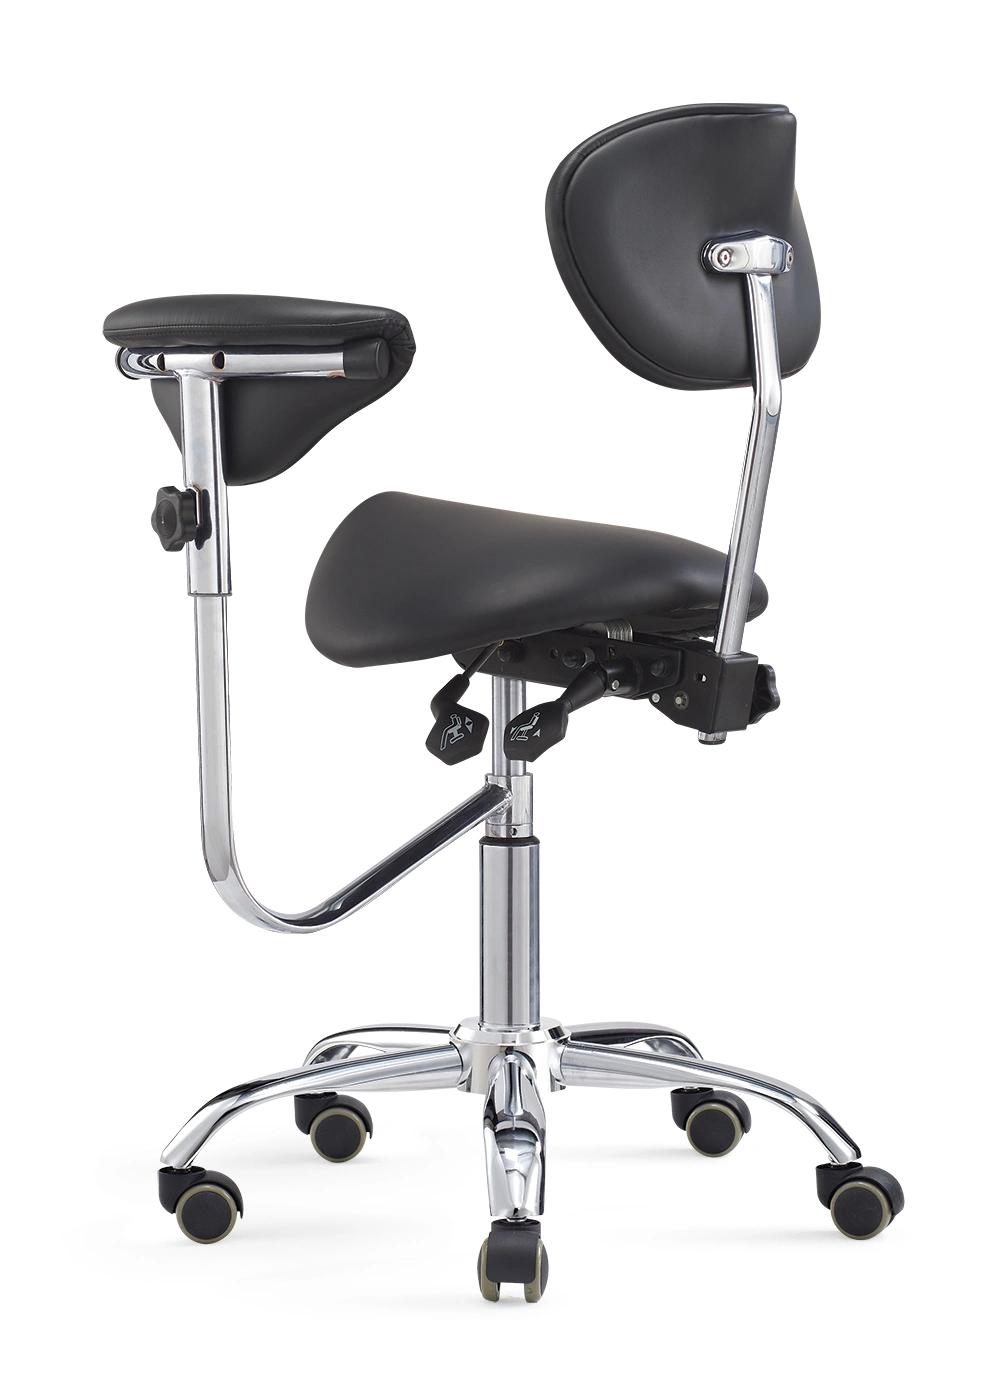 New Design Saddle Seat Stool Office Chair with Adjustable Swivel Backrest